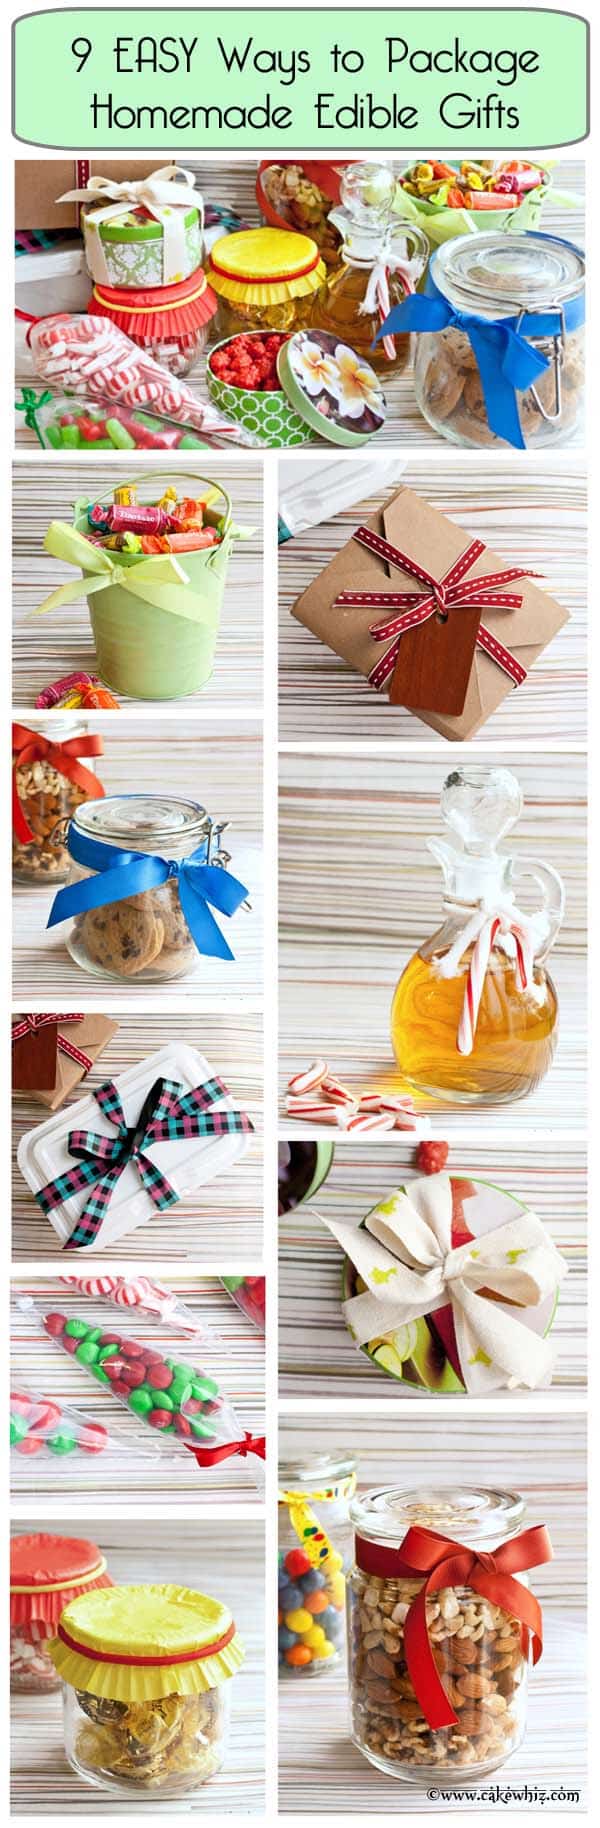 Collage Image Showing 9 Easy Ways to Package Edible Gifts (Cookies, Fudge, Candies)